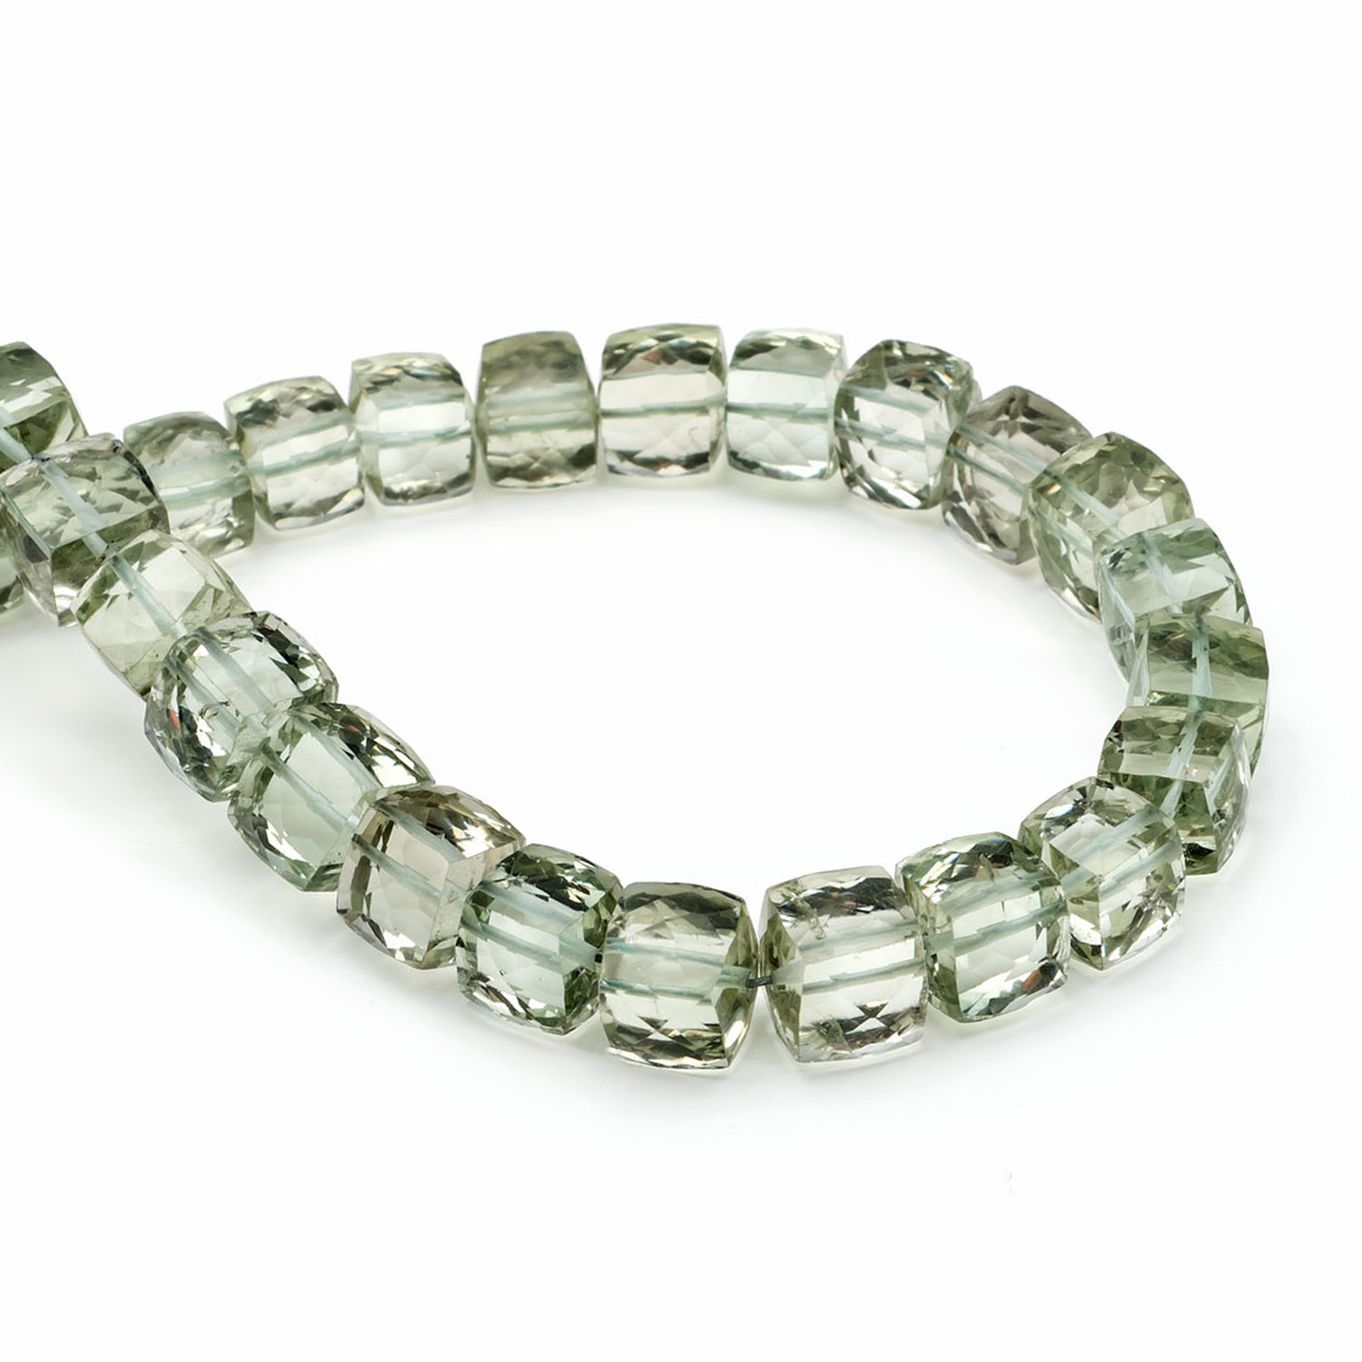 Green Amethyst Faceted Puffed Cube Beads, 5mm To 7mm